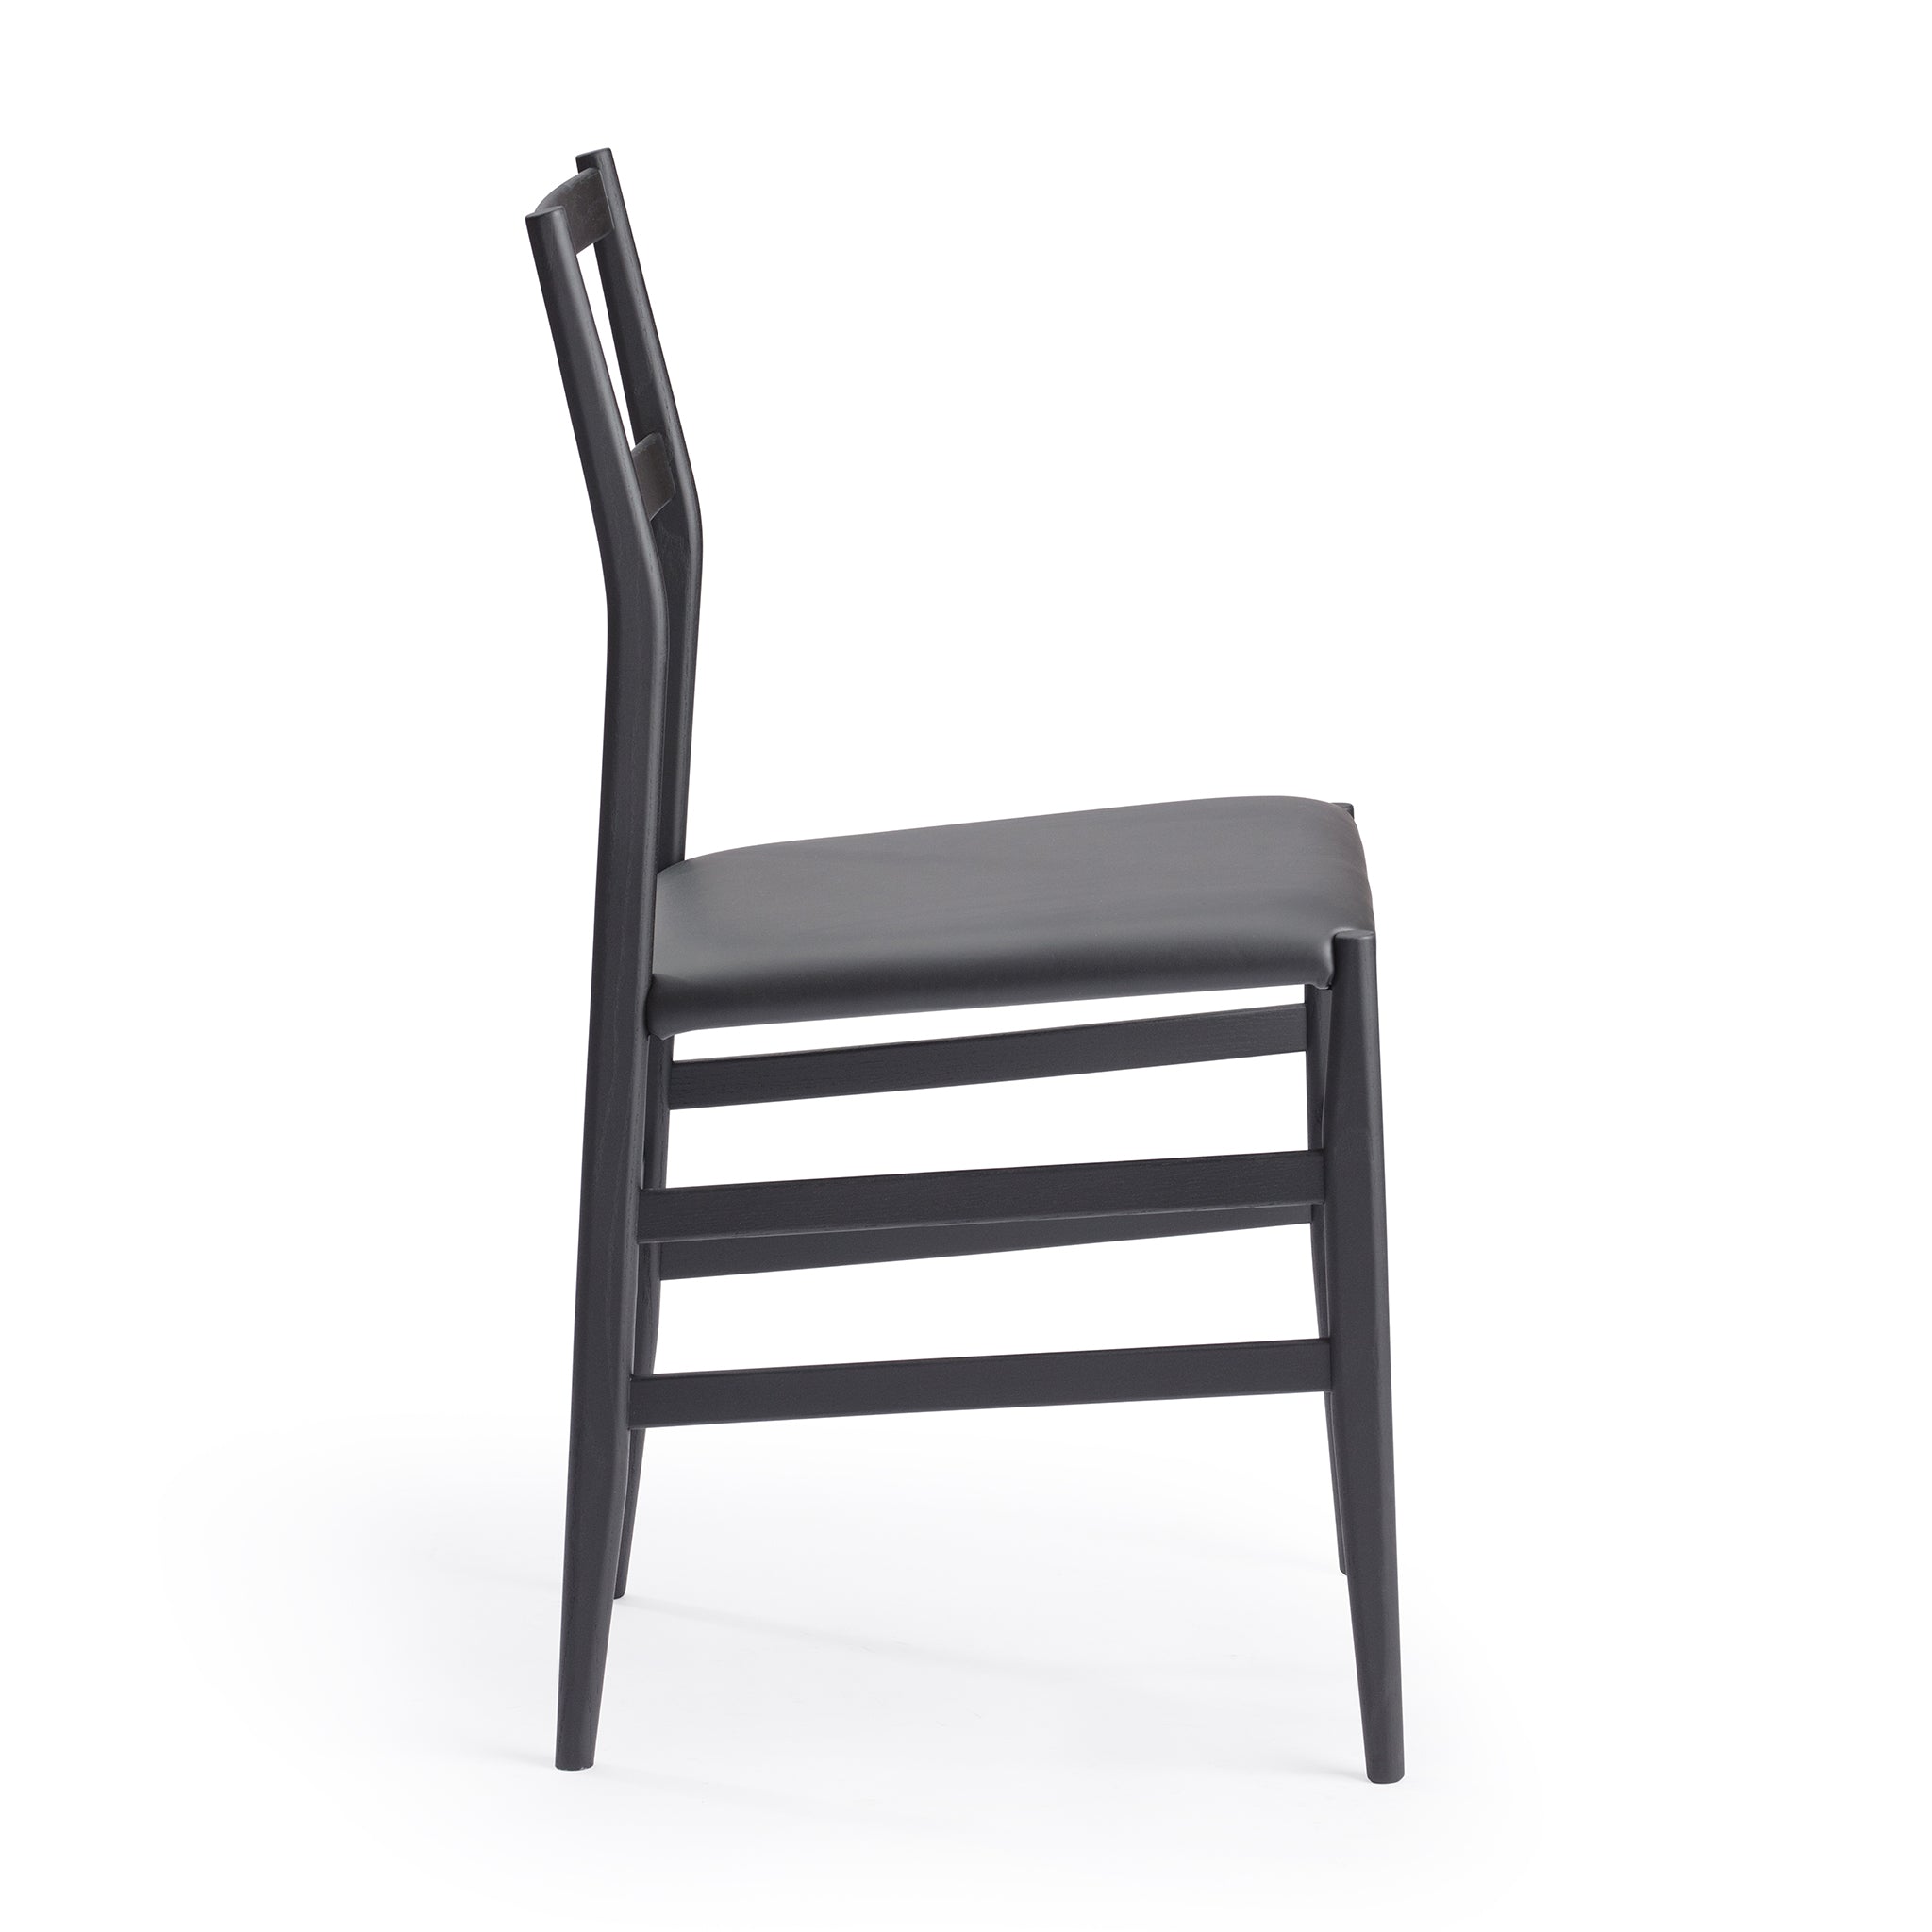 Side view of a Snella Modern Side Chair, black ash frame and black leather seat, closely resembling the superleggera chair by Gio Ponti, ultra-lightweight at 5 lbs, contract grade. Manufactured by Klarel in Italy. #K42-3